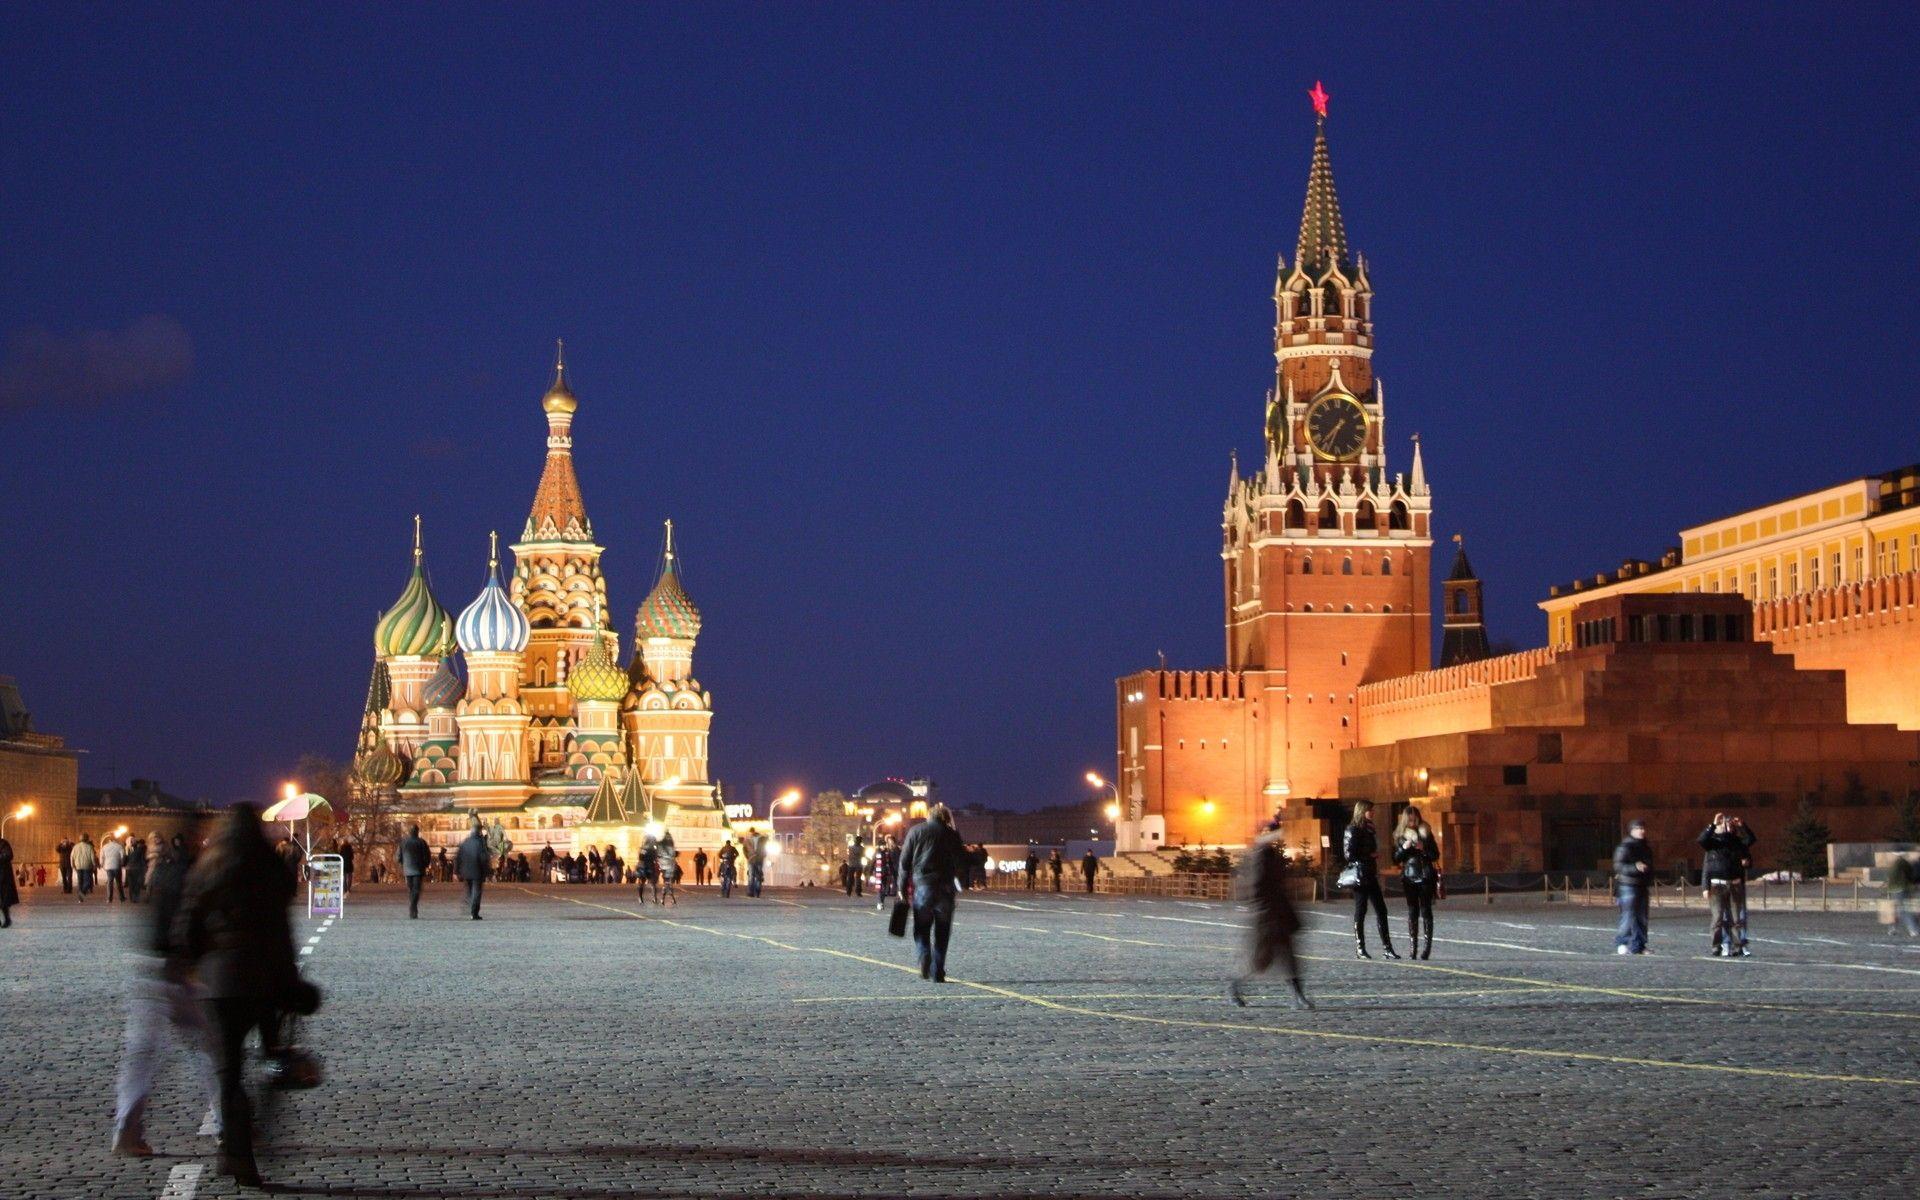 Wallpaper, Russia, Moscow, Kremlin, Red Square, people, movement